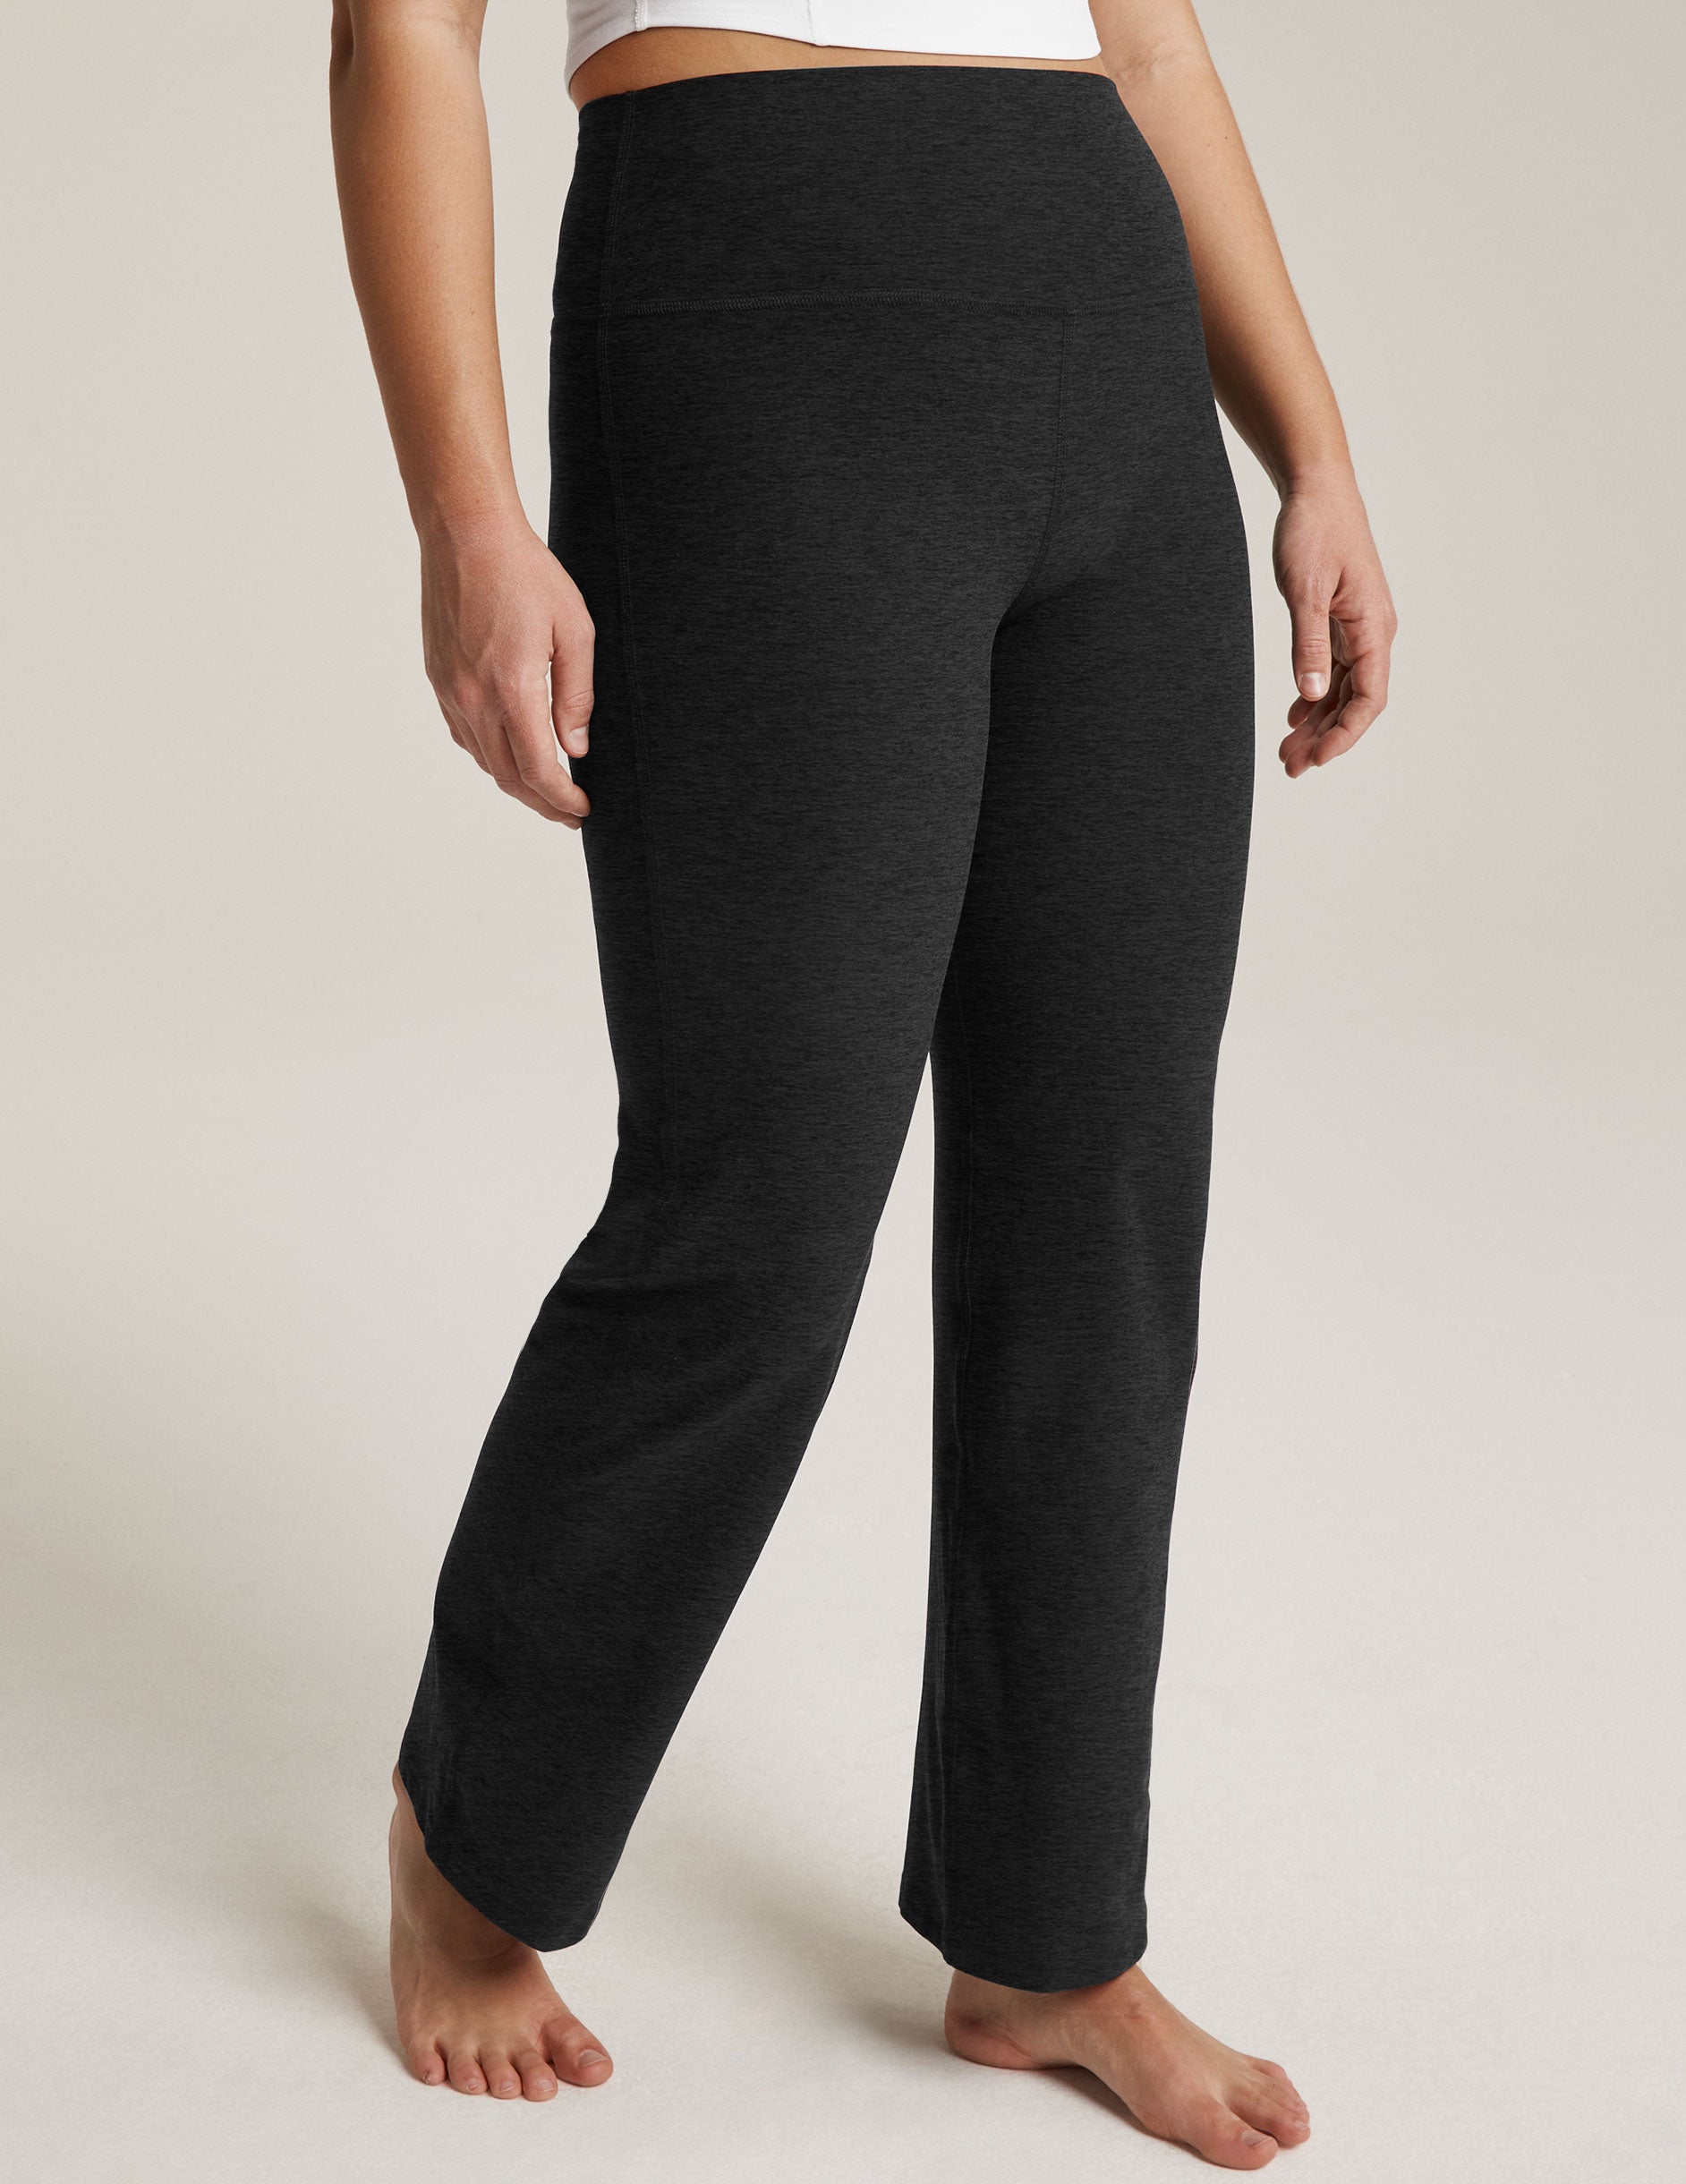 Beyond Yoga Formal Trousers & Hight Waist Pants sale - discounted price